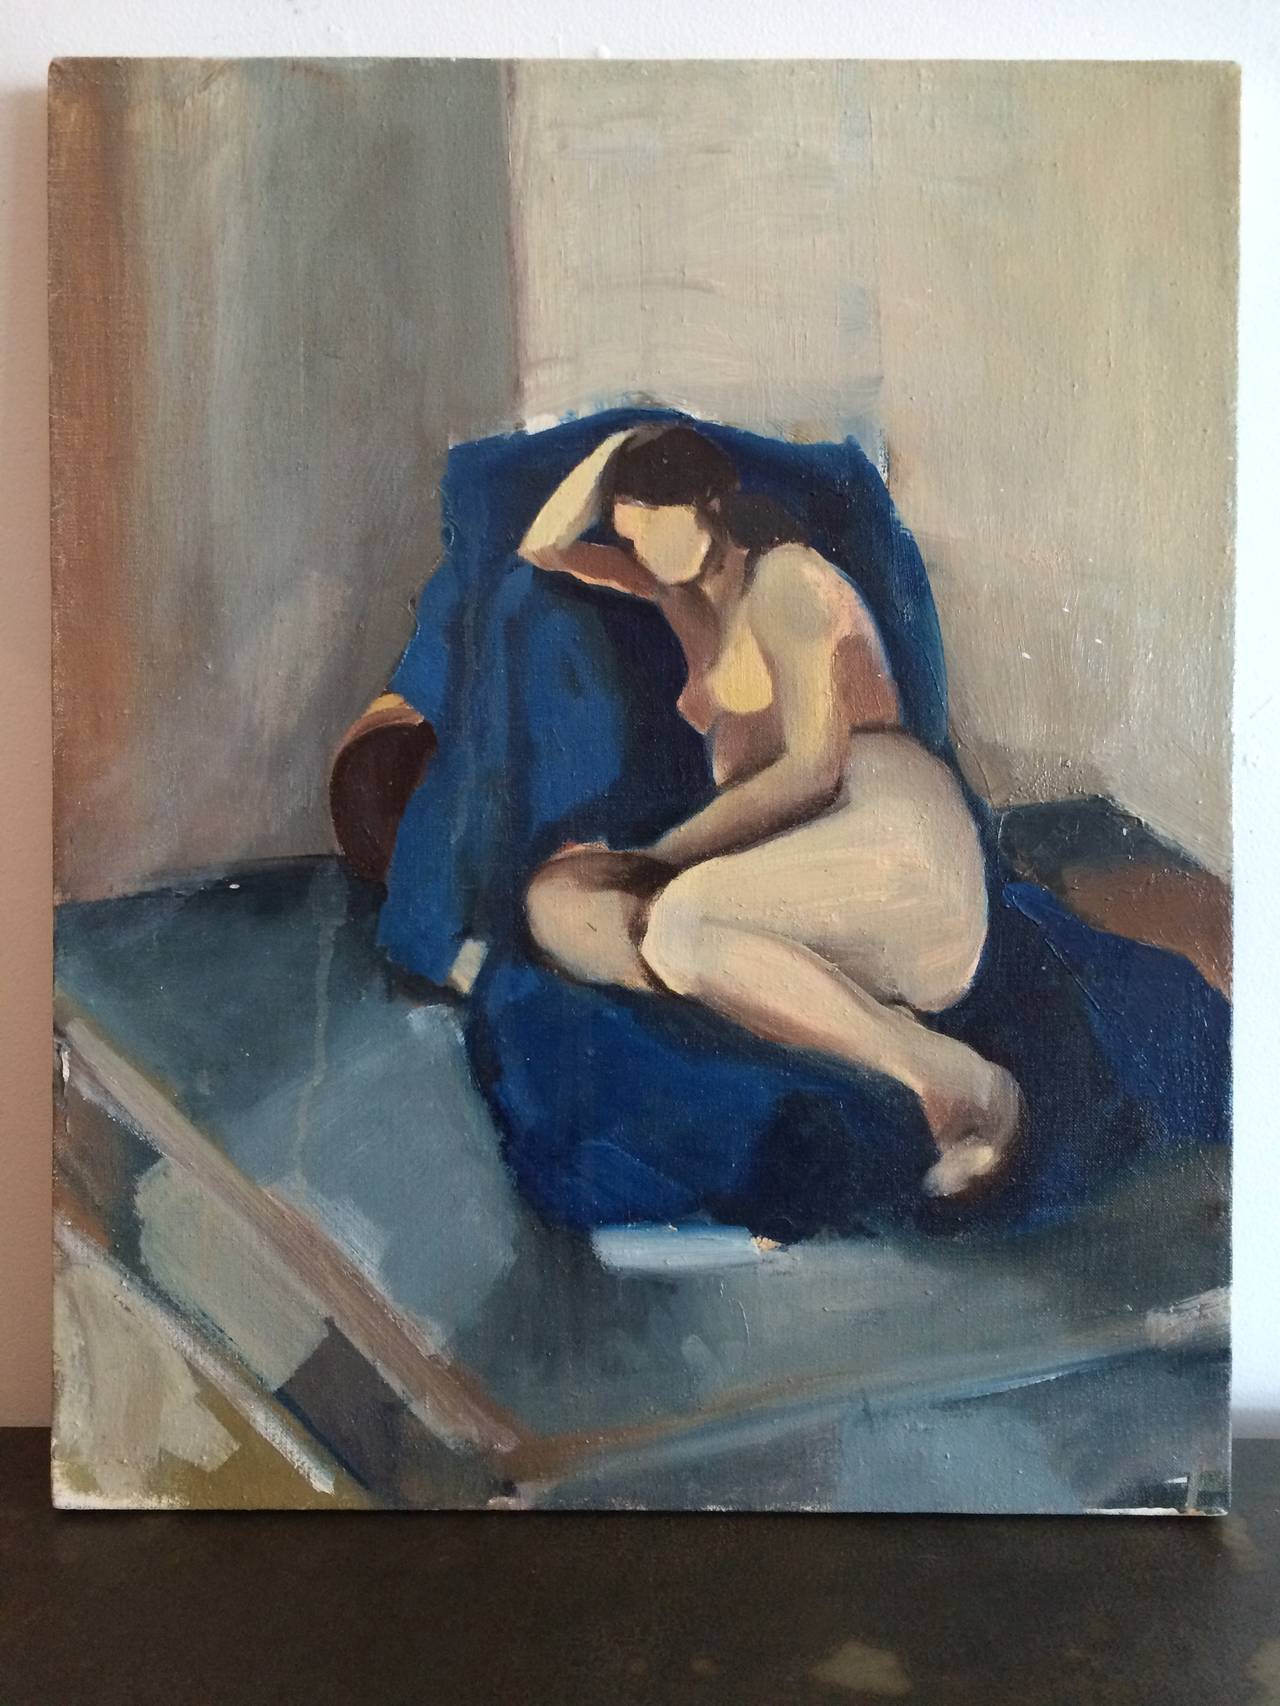 Acrylic on canvas painting of a stylized nude women in repose on a blue chaise longue.